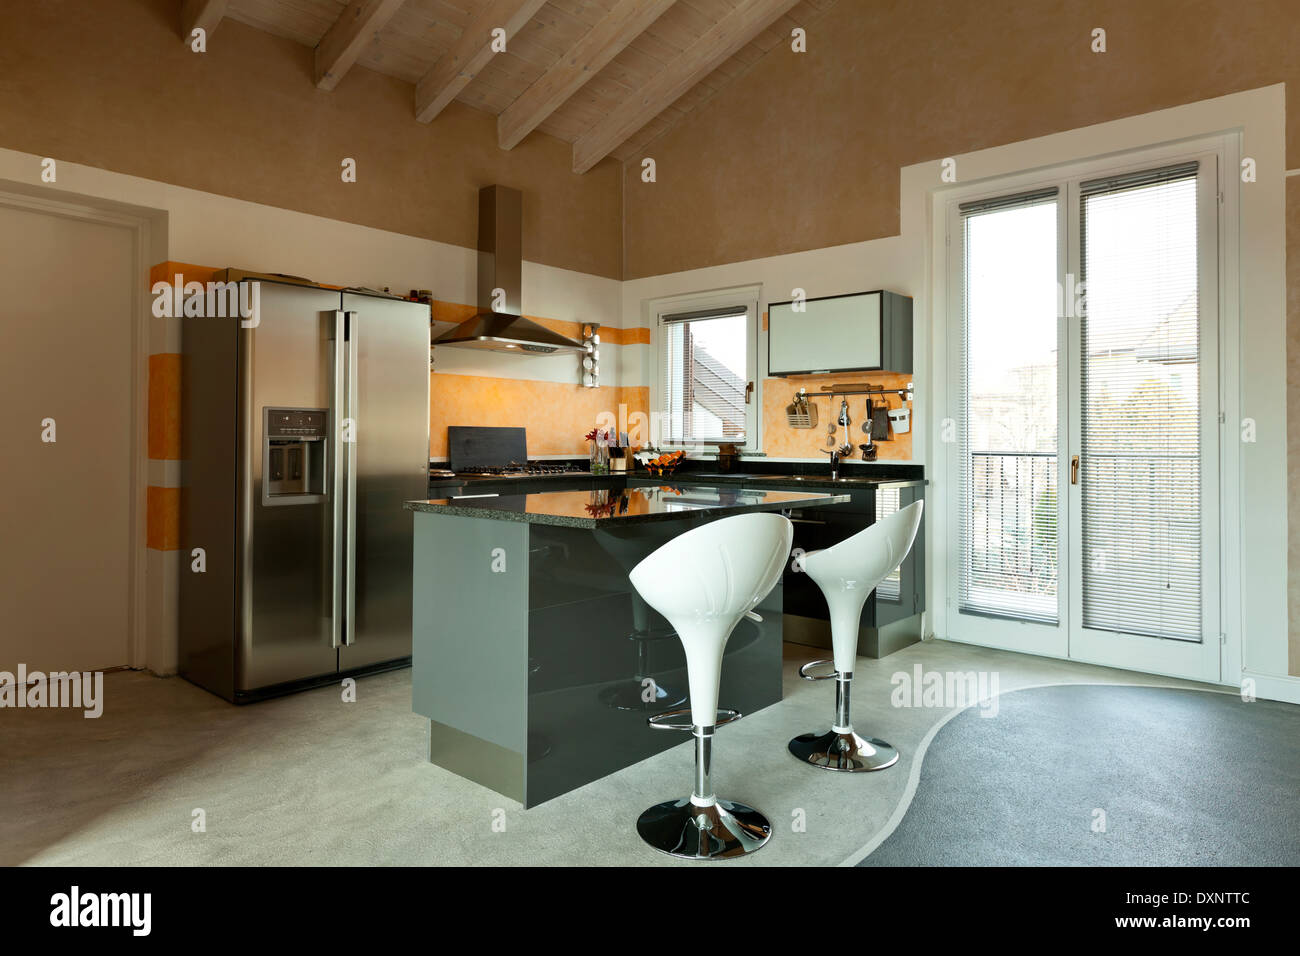 interior, new loft furnished, kitchen island with two stools Stock Photo